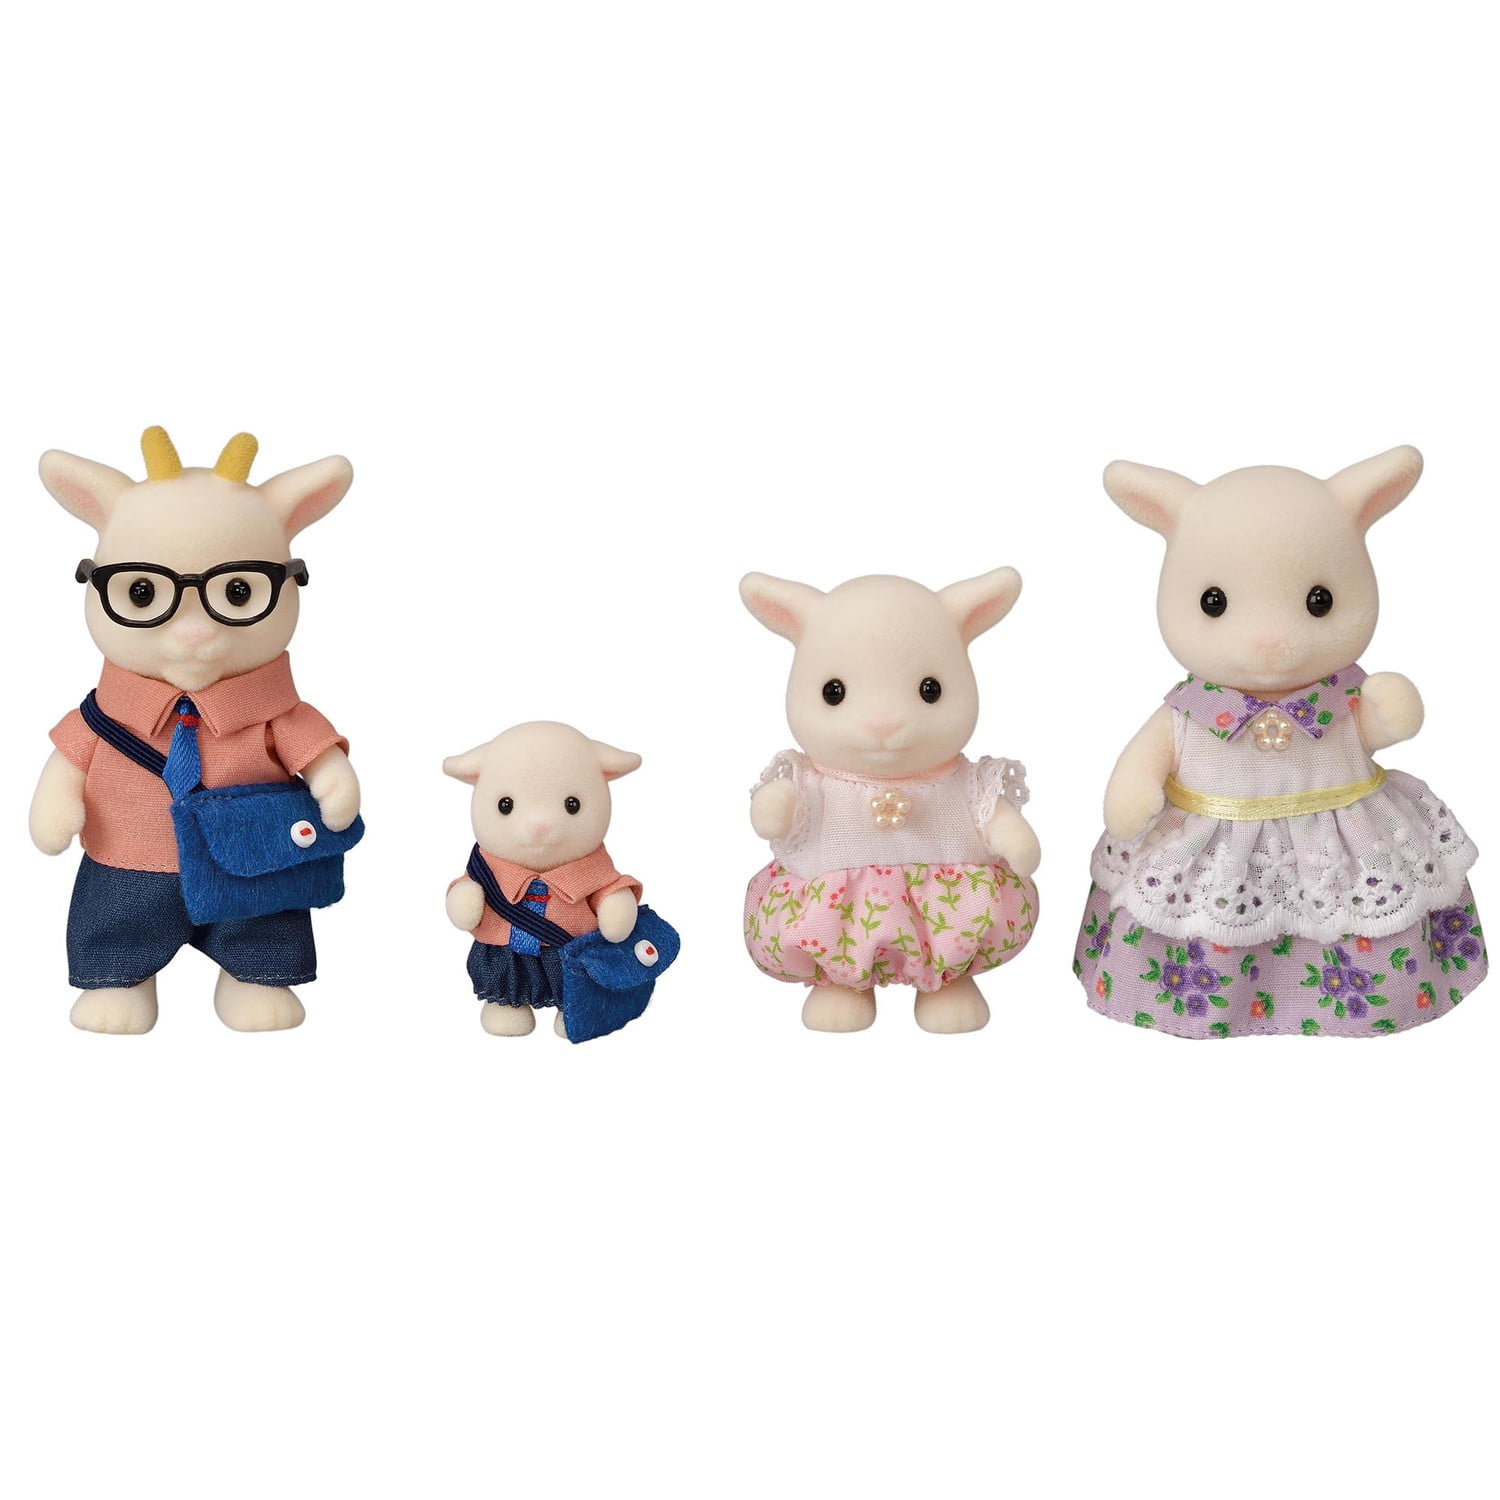 Sylvanian Families Hedgehog Family Posable Collectable Figures 4 Pieces Set Toy 